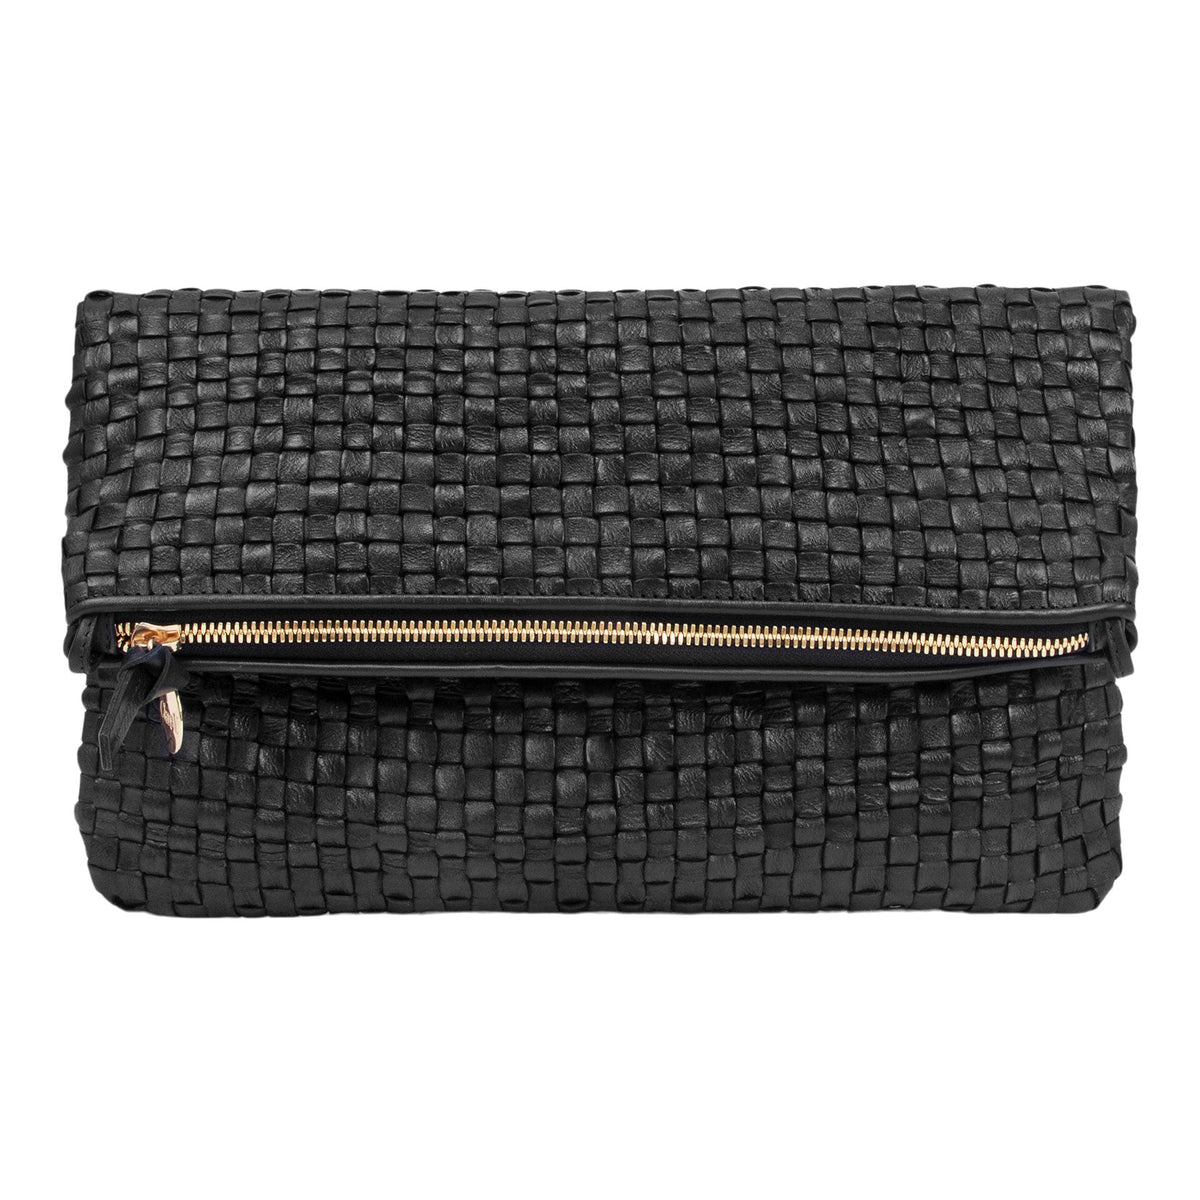 Clare V. Petit Zip Wallet Cuoio with Black & Cream